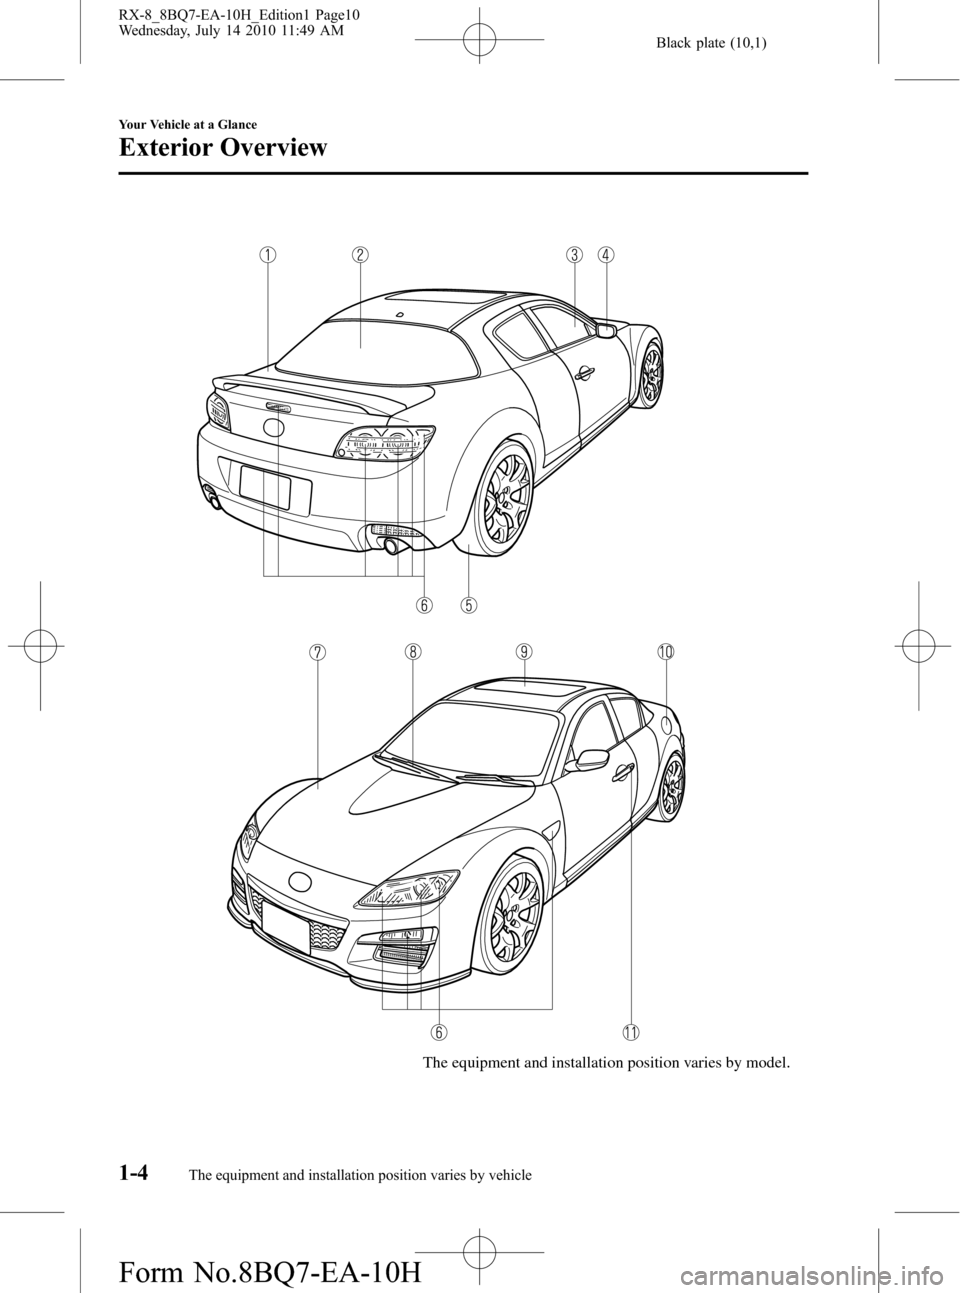 MAZDA MODEL RX 8 2011  Owners Manual (in English) Black plate (10,1)
The equipment and installation position varies by model.
1-4
Your Vehicle at a Glance
The equipment and installation position varies by vehicle
Exterior Overview
RX-8_8BQ7-EA-10H_Ed